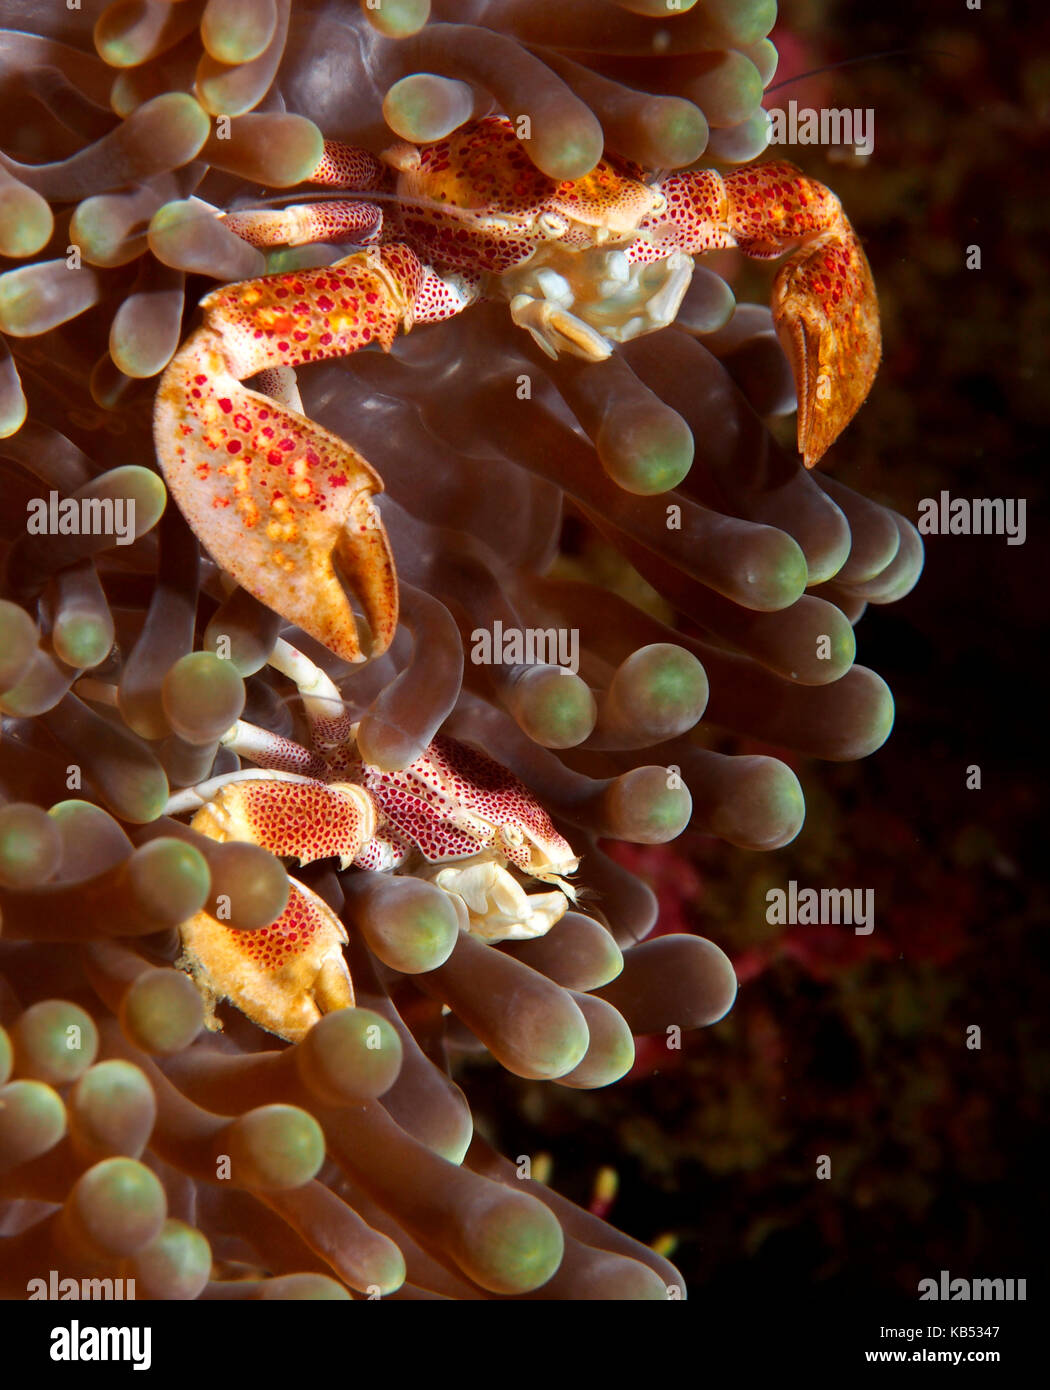 Two Spotted Porcelain Crab (Neopetrolisthes maculatus) above eachother in their hosting anemone, Philippines, Mindoro, Puerto Galera, Sabang beach Stock Photo